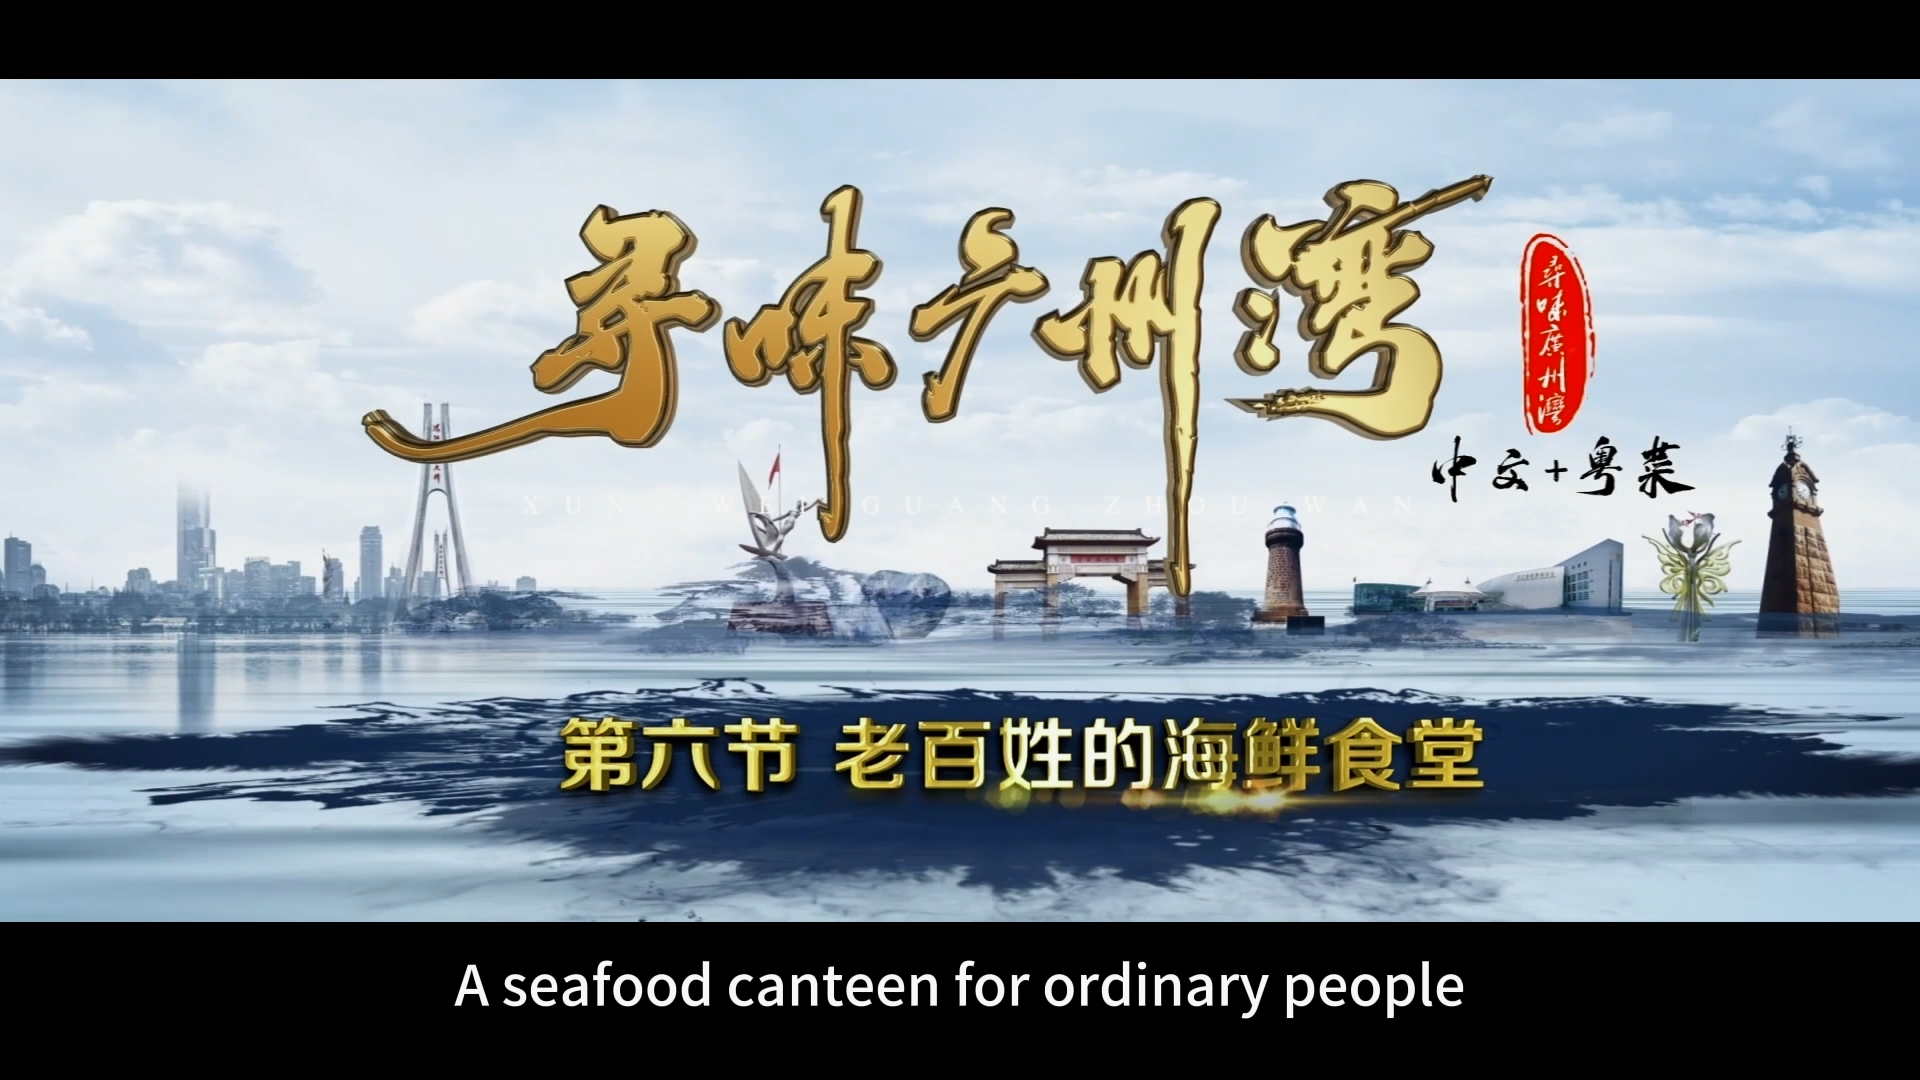 The people’s seafood restaurant